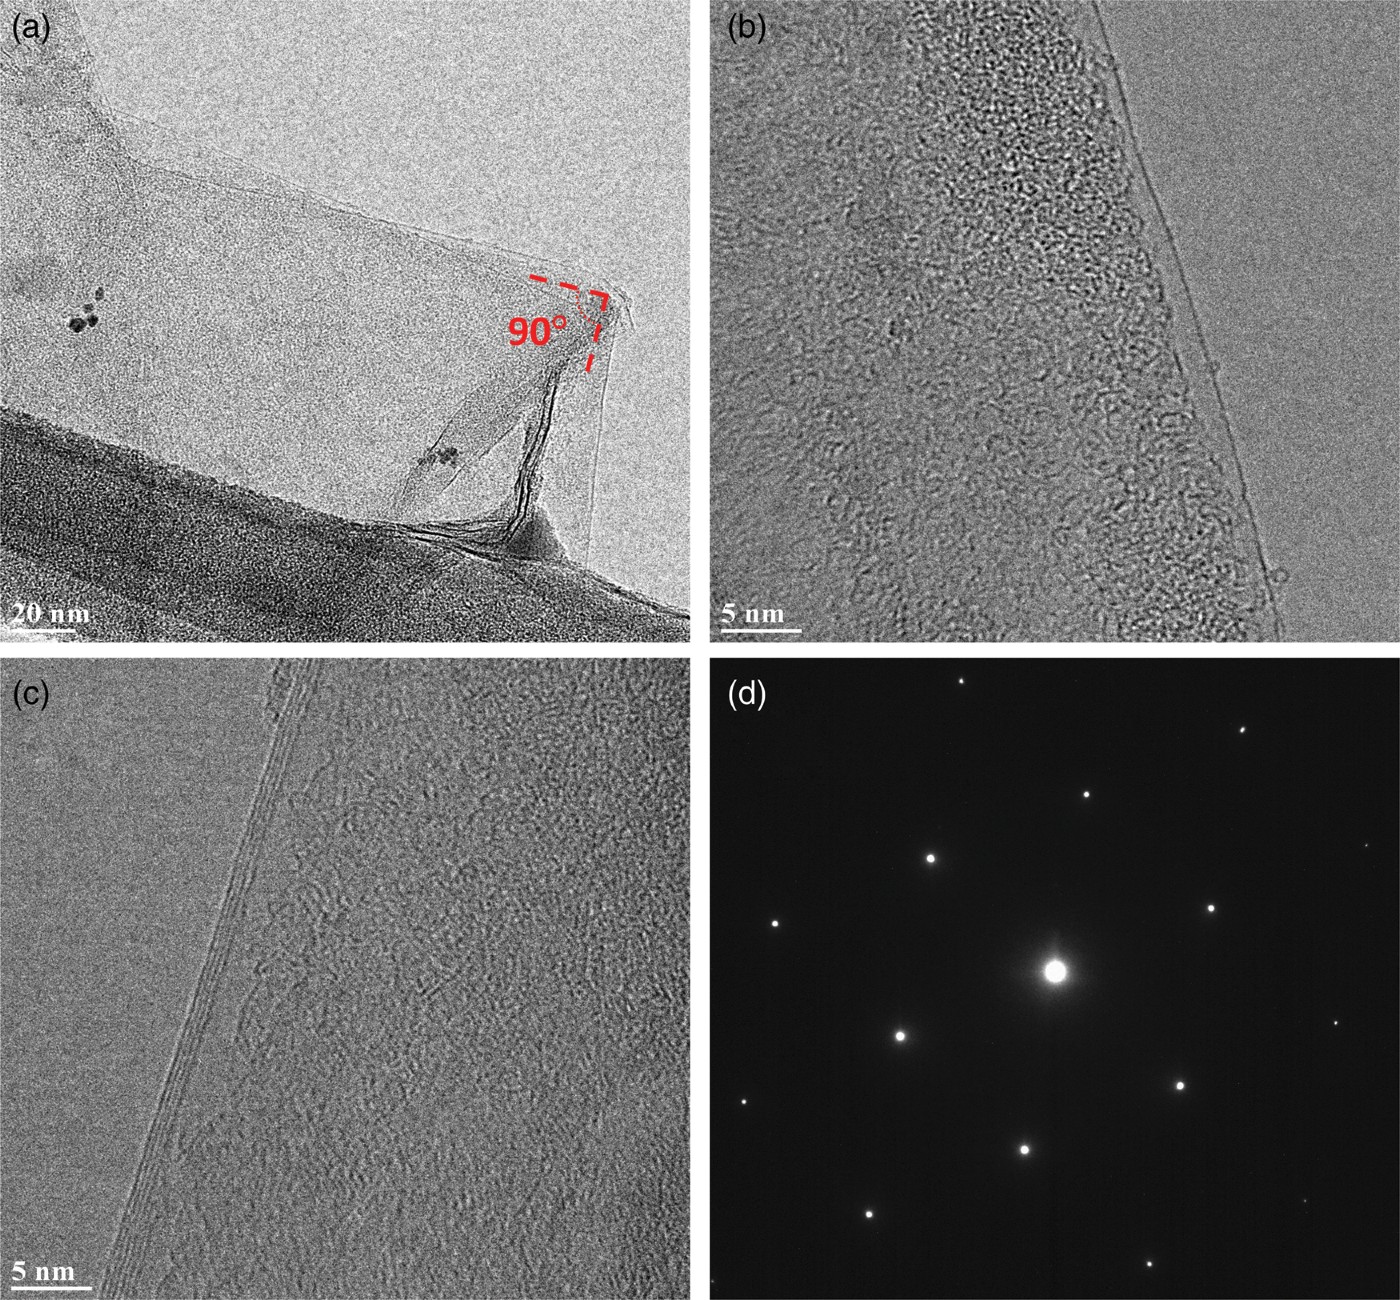 Figure 5. HRTEM images of (a) the edges of single-layer graphene domains with ∼90° corners (indicated by dashed red lines). (b) Single-layer graphene. (c) Few-layer graphene. (d) Electron diffraction showing single-crystal structure feature of individual ‘square’ graphene domains.